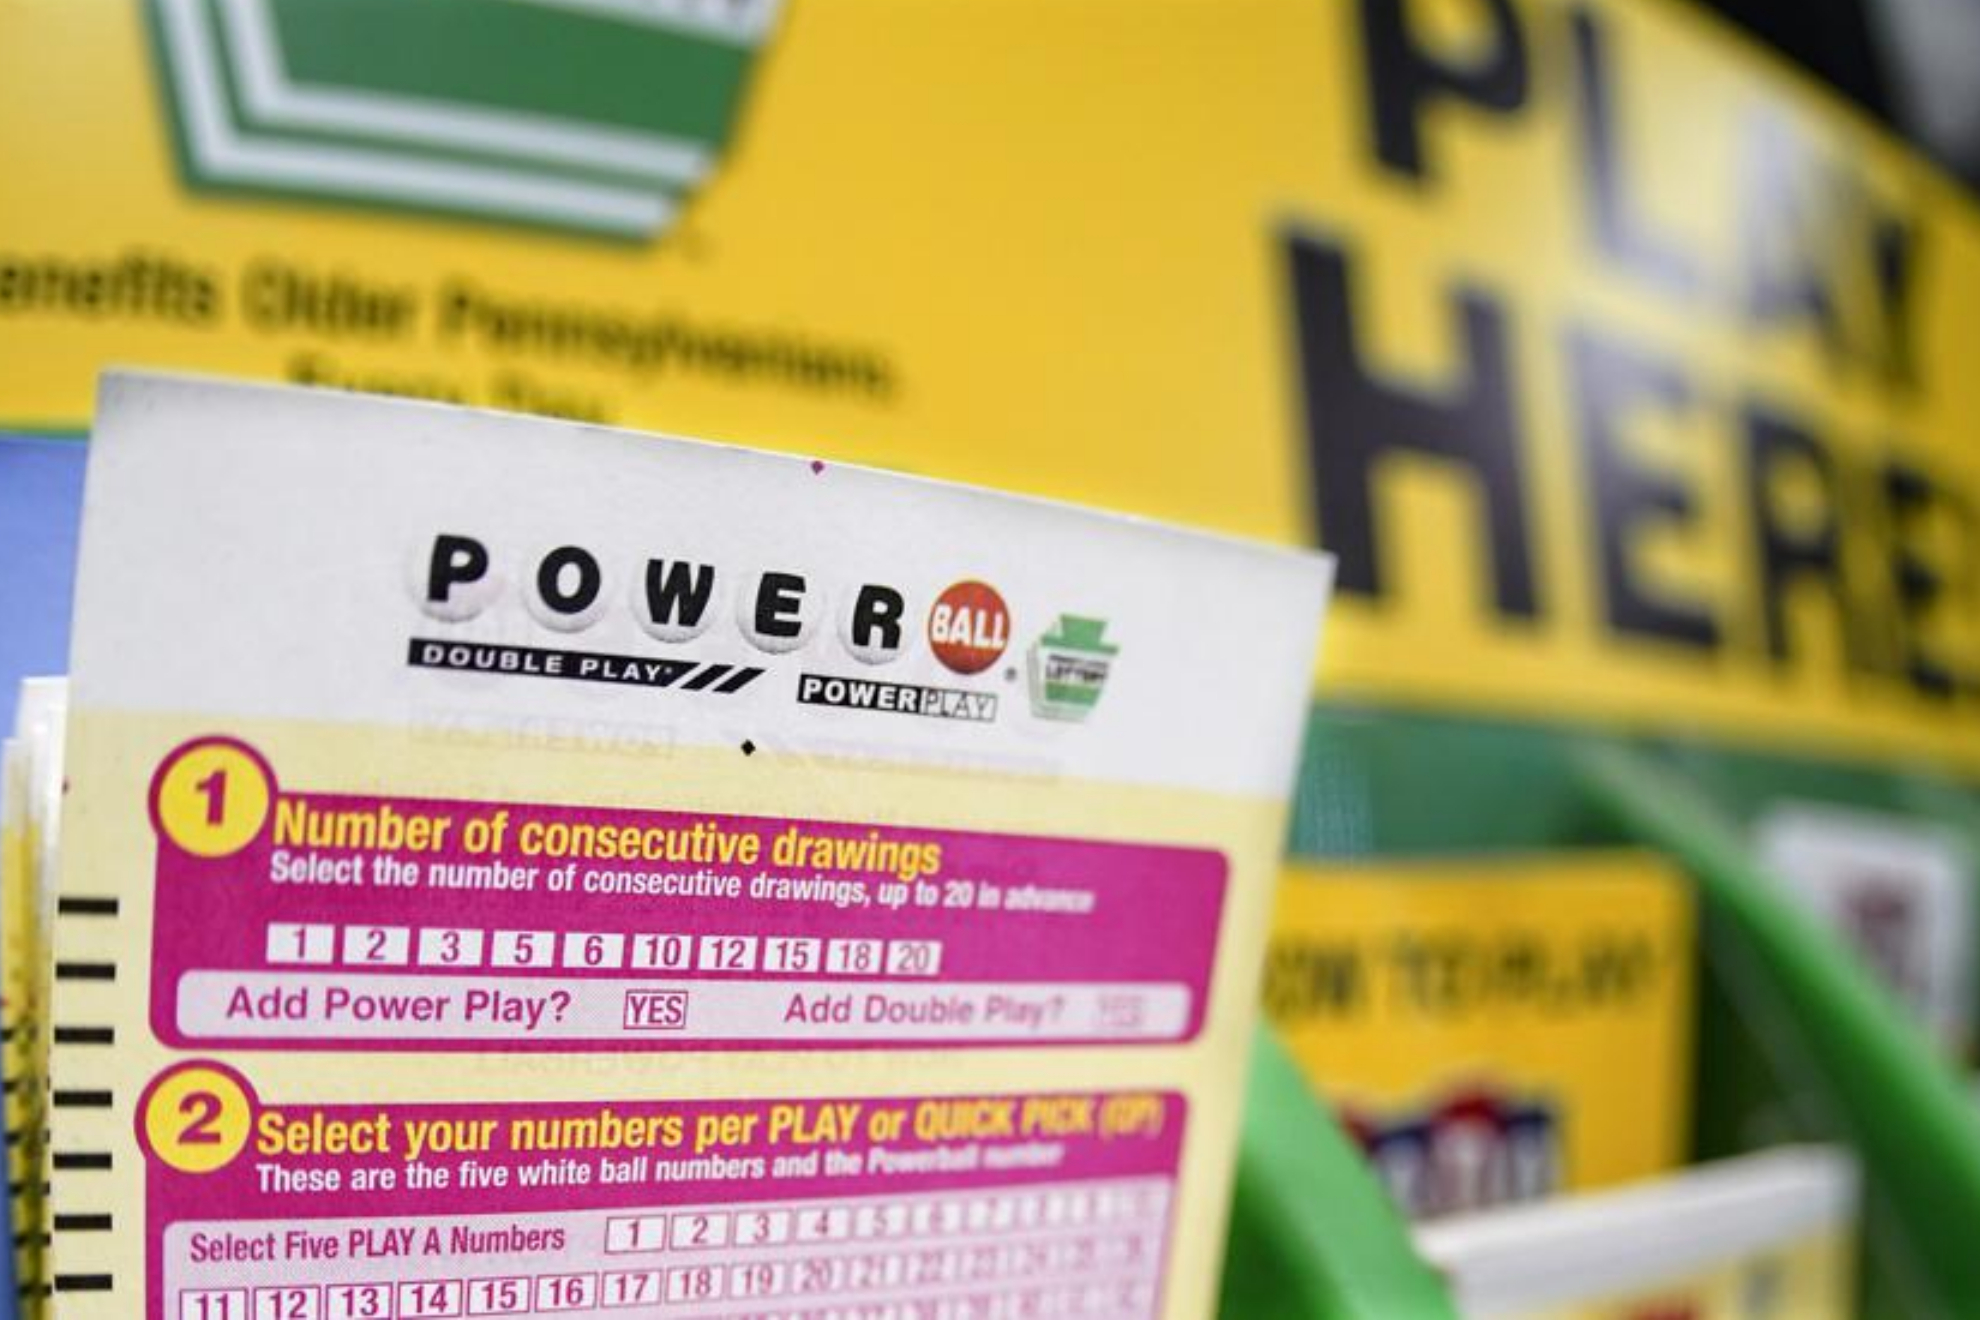 Powerball will have one of the biggest jackpots in US history on their next drawing.